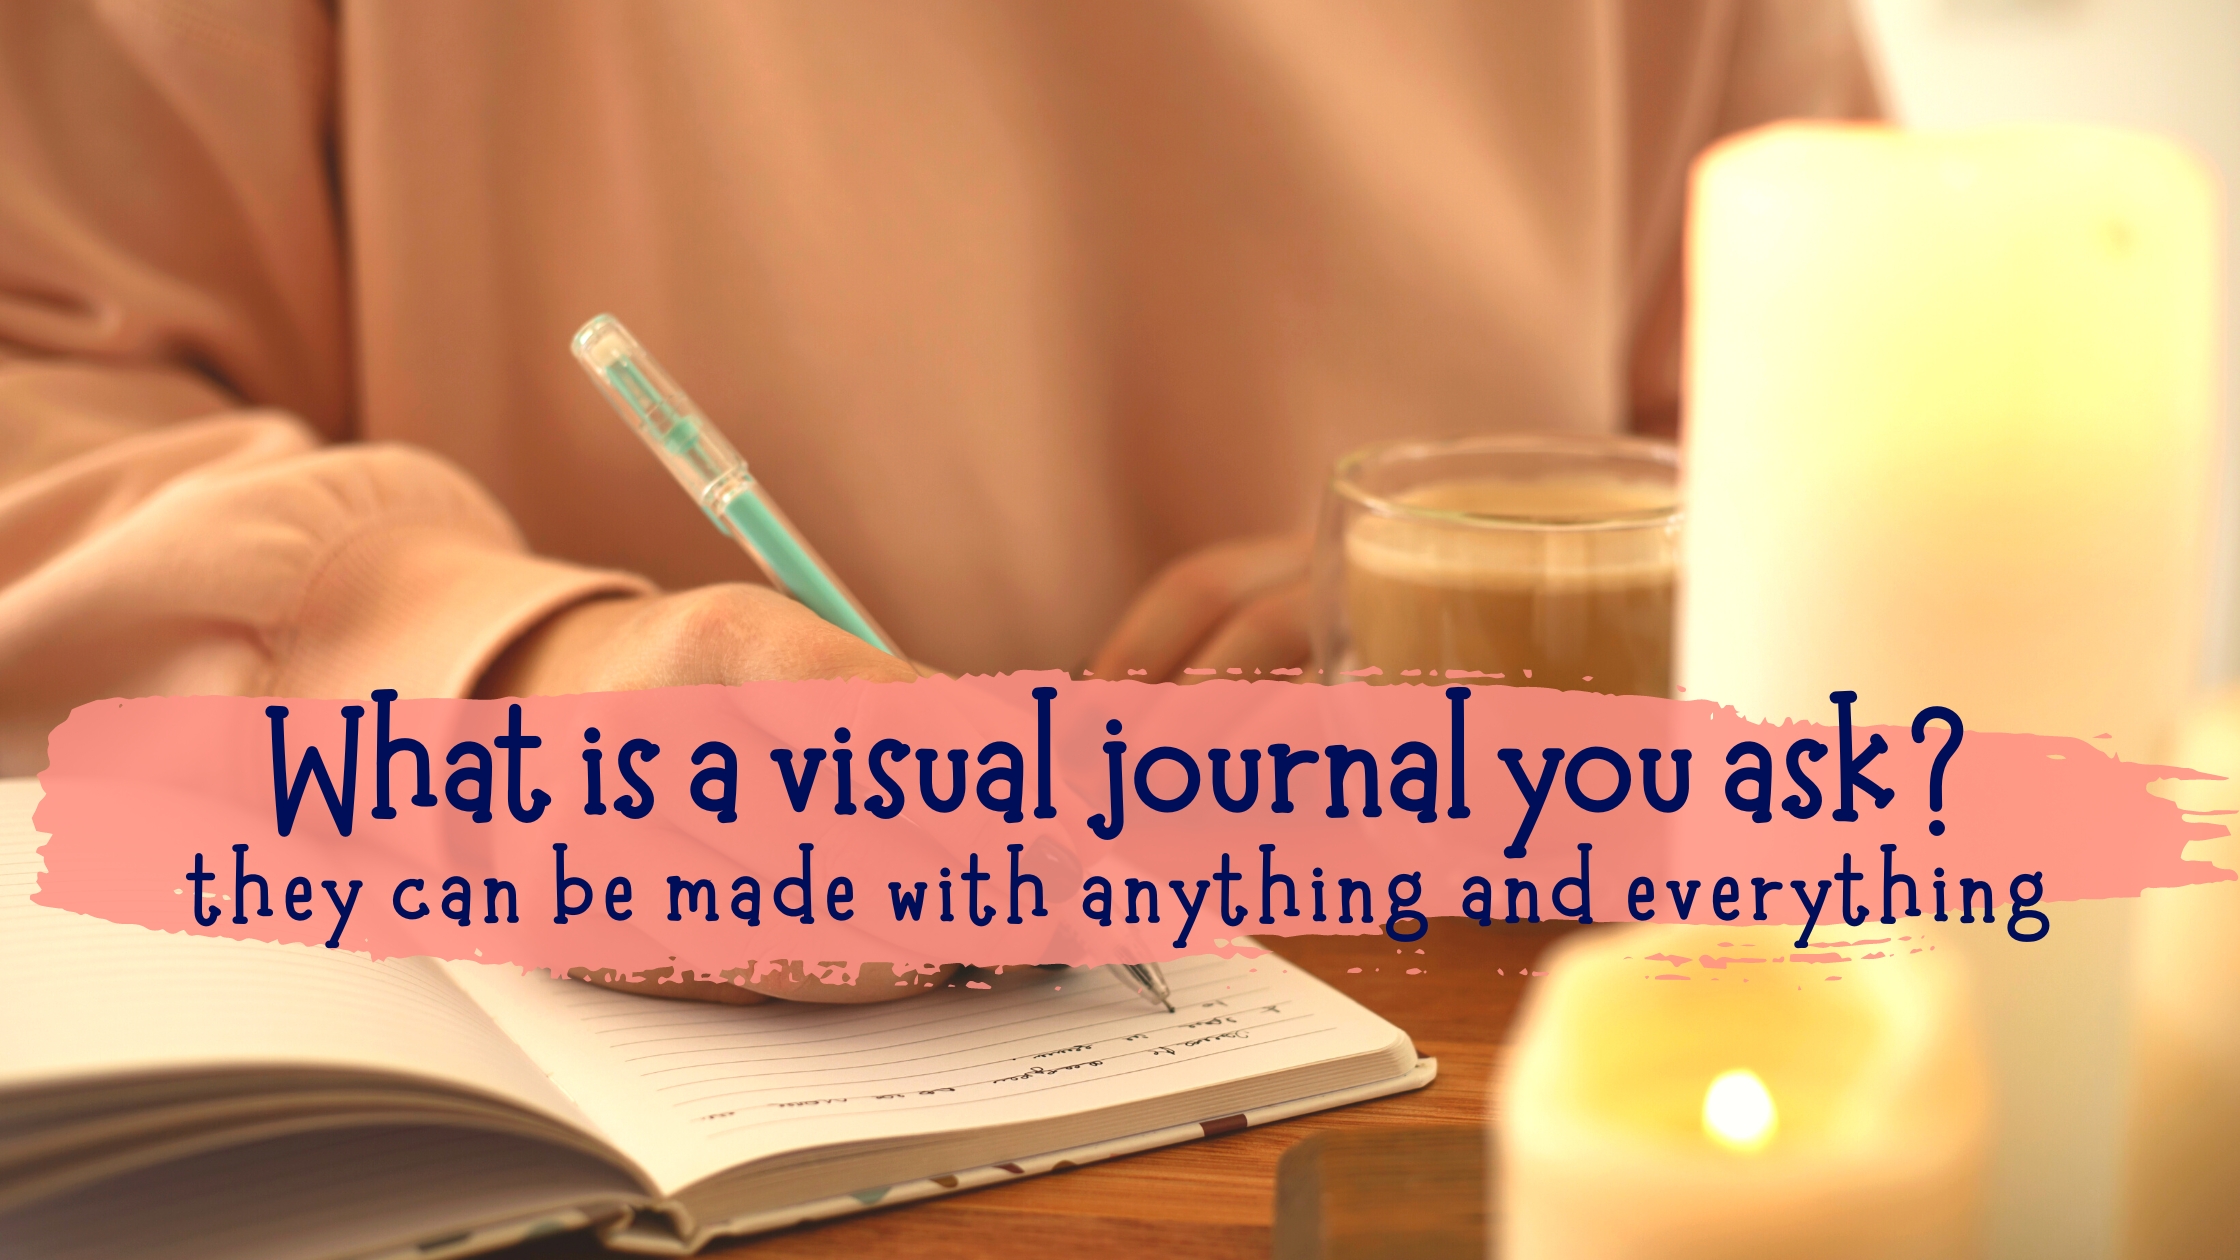 visual journal, visual journaling, how to keep a visual journal, journaling, journal to heal